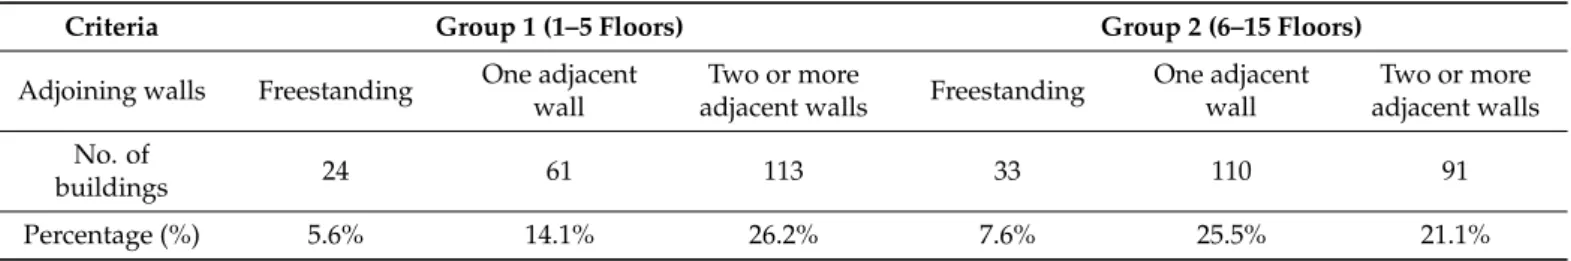 Table 2. The second step in the classification divided each group into three subgroups based on adjoining walls (freestanding, one adjacent wall, and two or more adjacent walls).